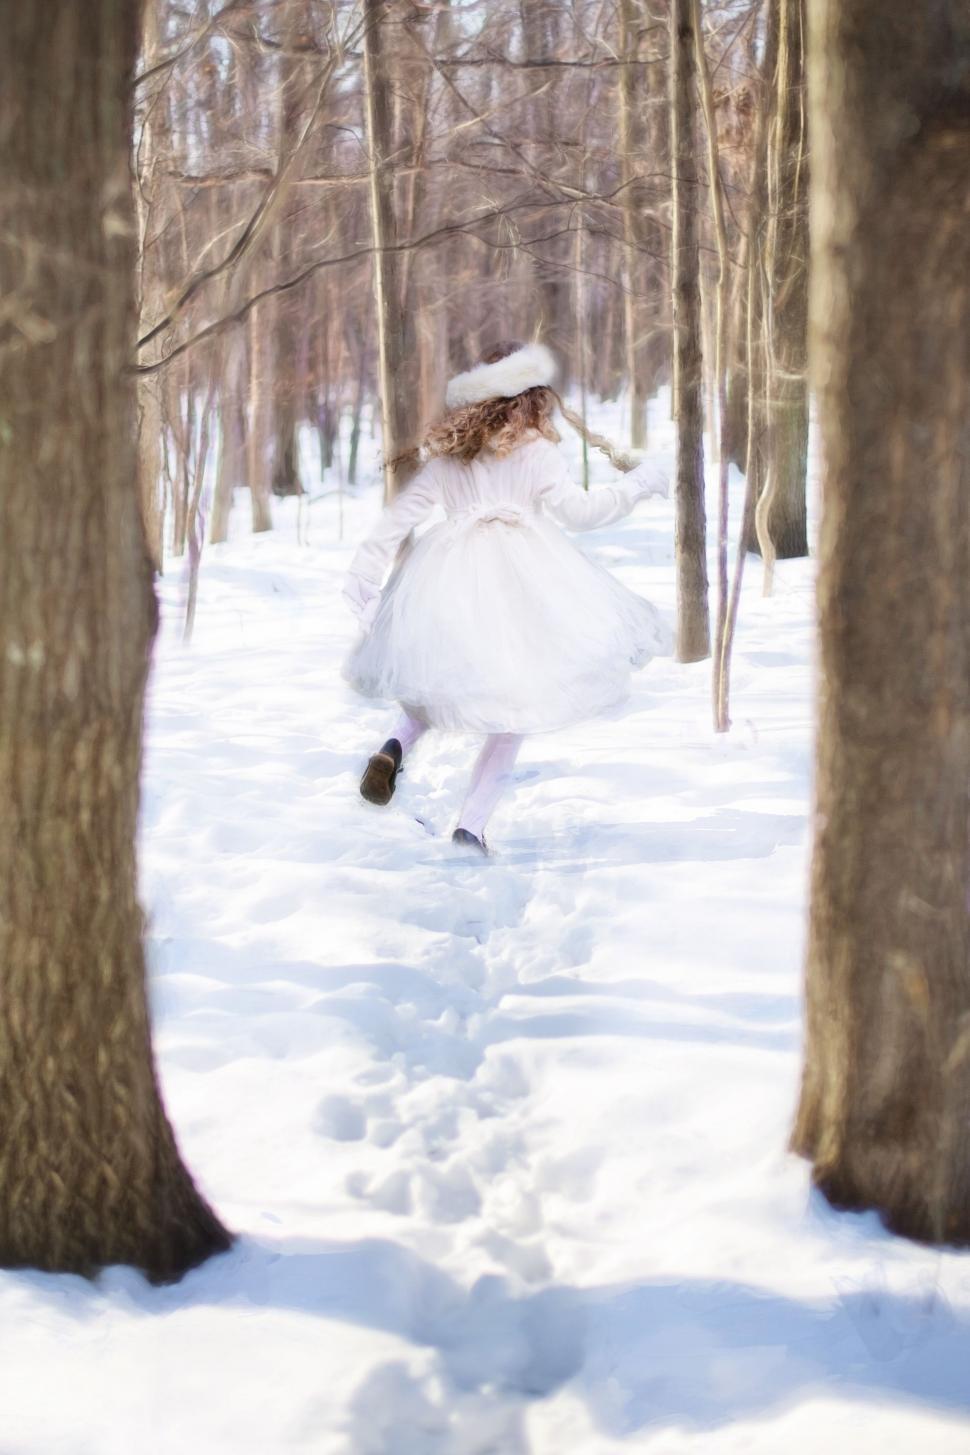 Free Image of Little Girl in Snow with trees  